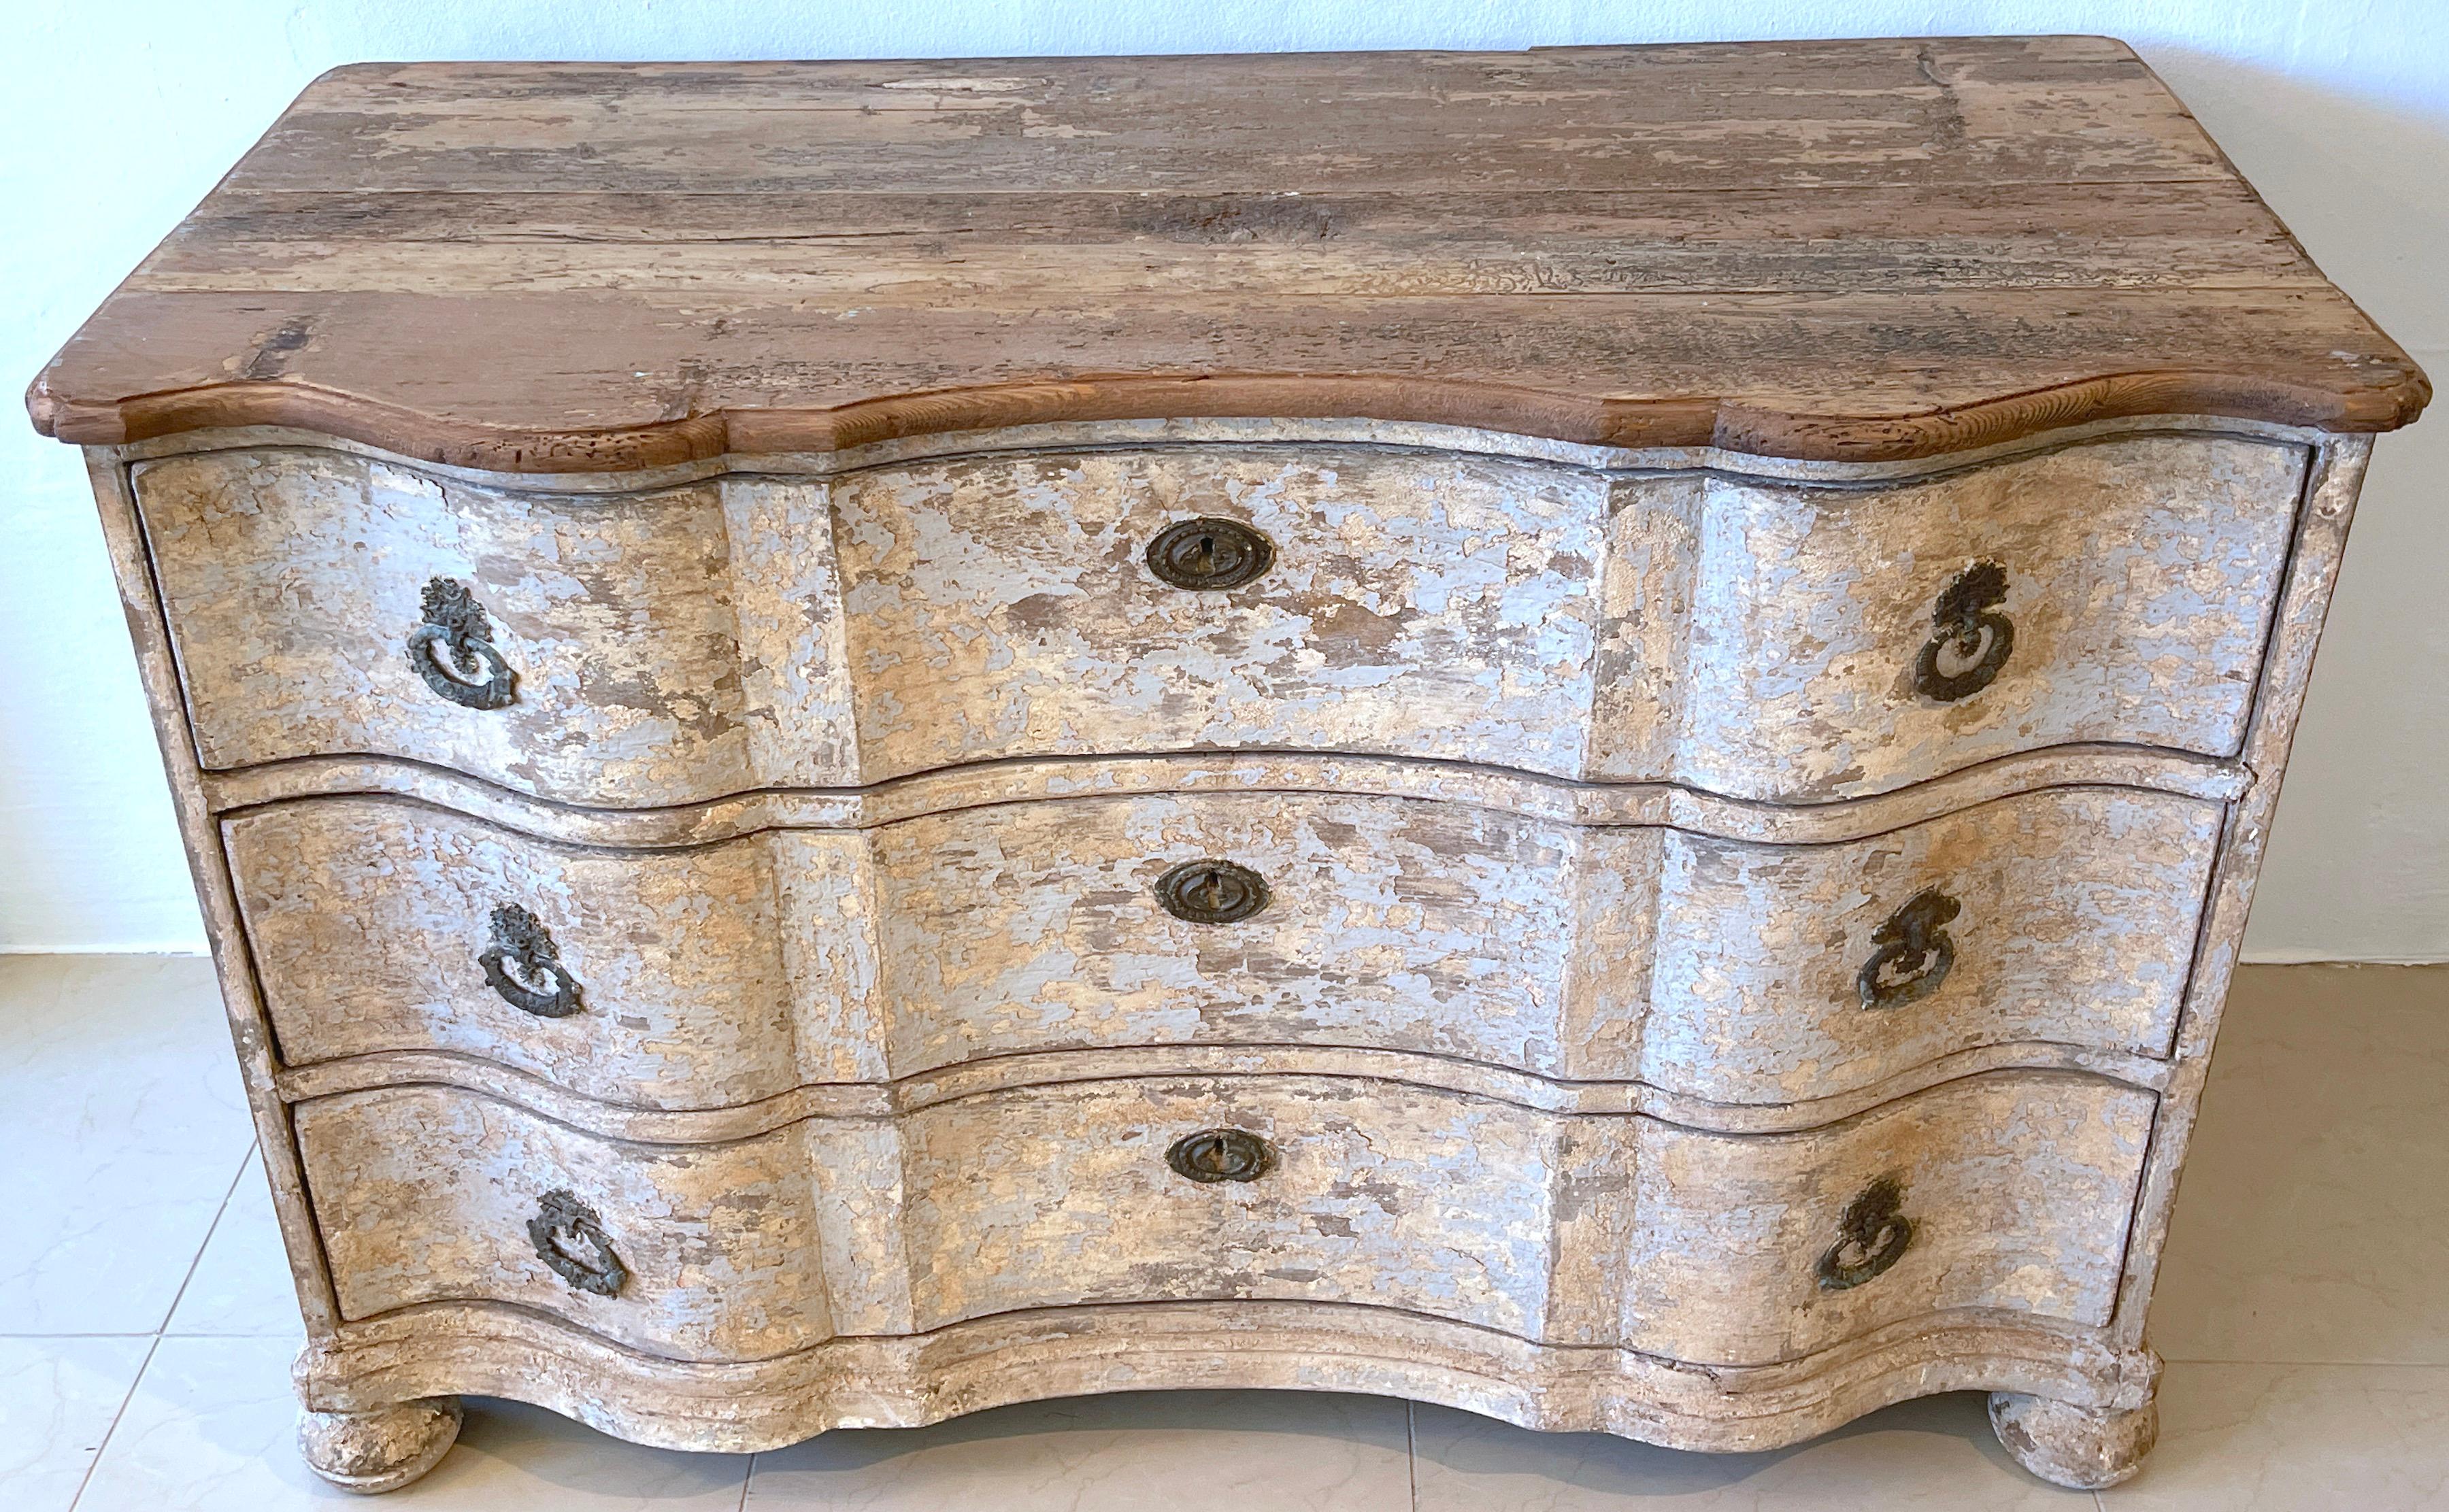 18th Century Italian  Neoclassical Painted Serpentine Commode 
Italy, 18th Century 
A substantial chest of drawers with natural walnut serpentine top, resting on a lower block front distressed paint decorated case fitted with four long drawers, each